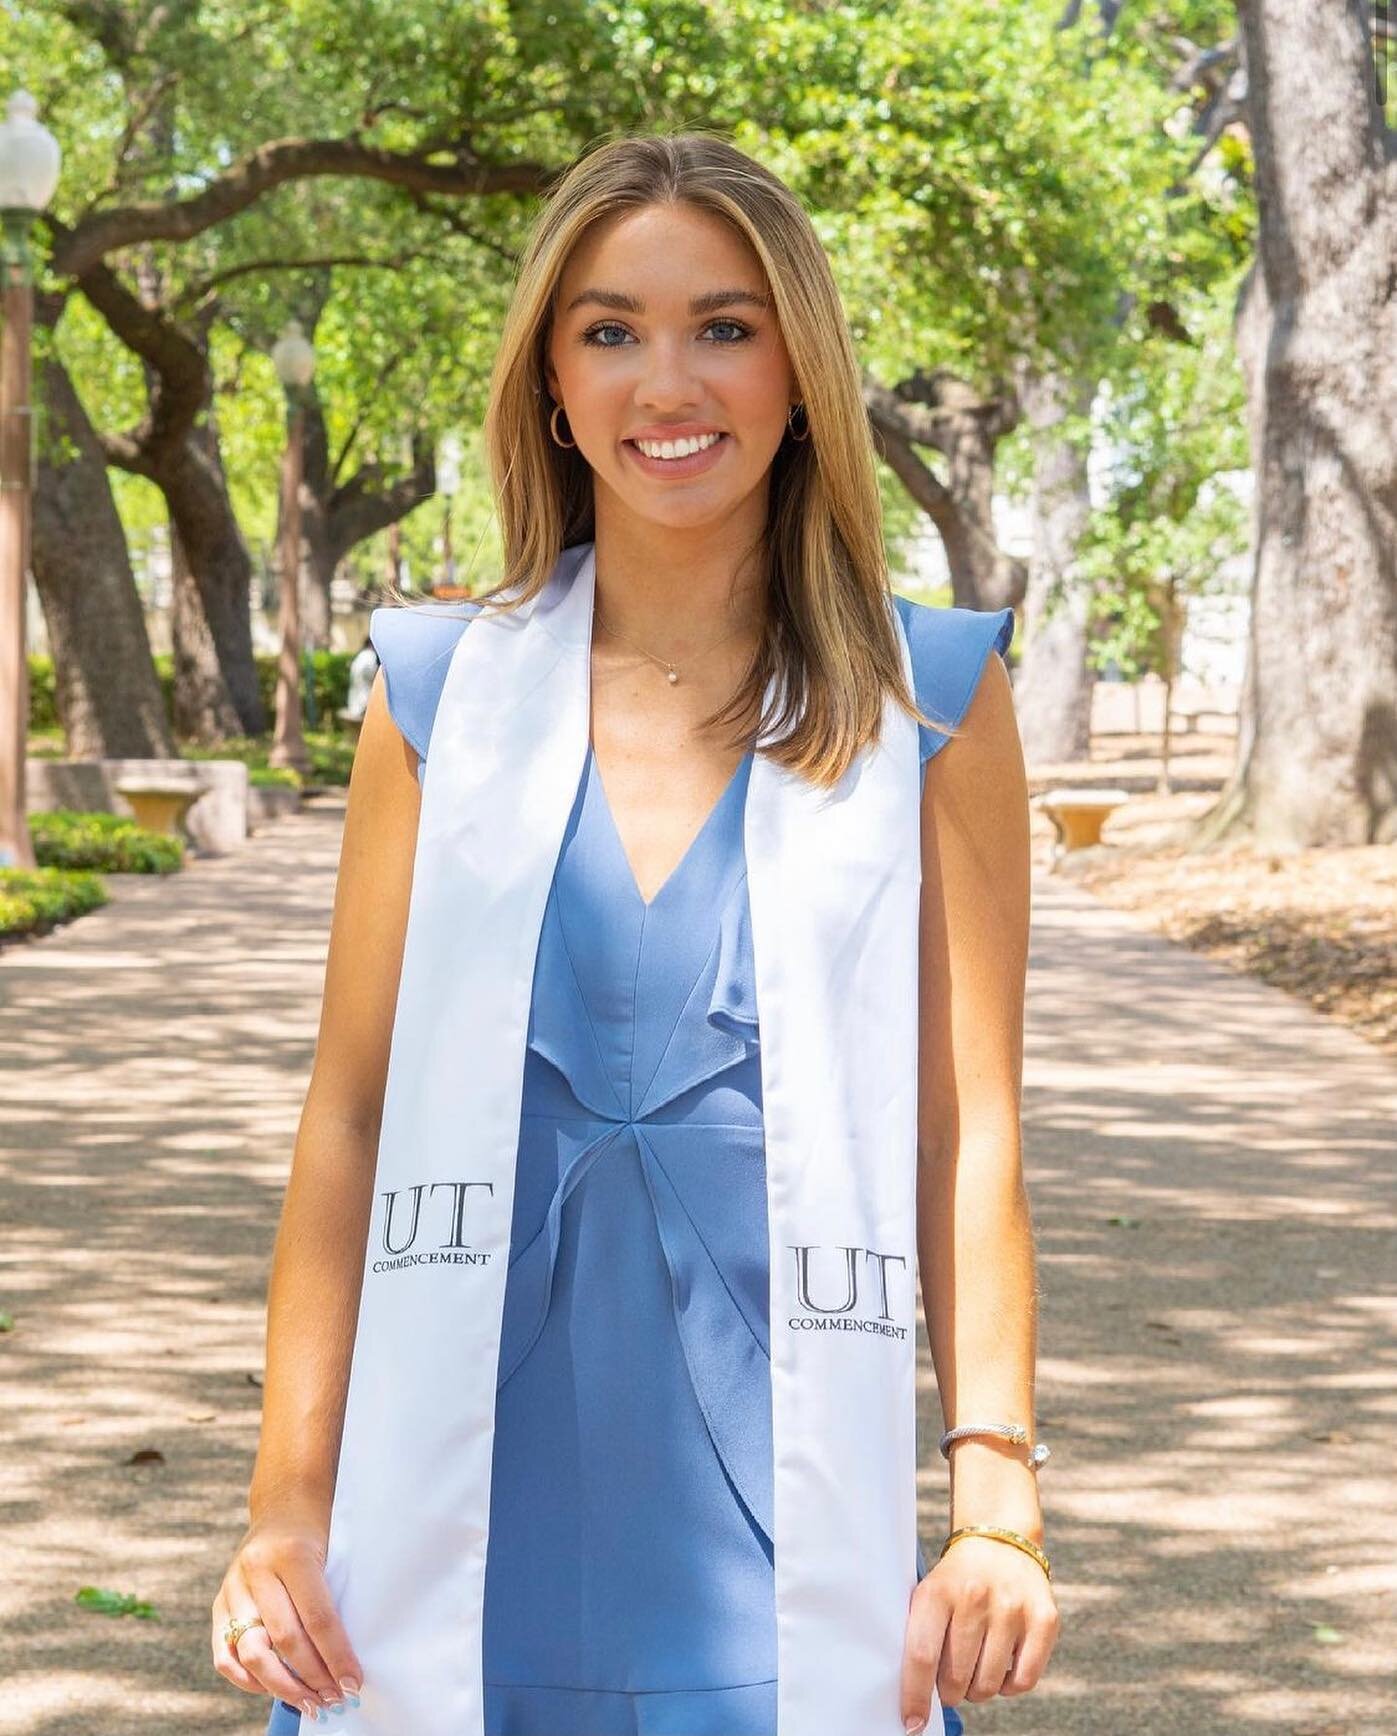 Congrats 2021 Graduates! 

Book your tan now for your big day! $35 student tans! 

Call, DM, or visit our website to book an appointment.

#graduation #co2021 #seniors #utsenior #utgraduation #hookem #austin #utaustin